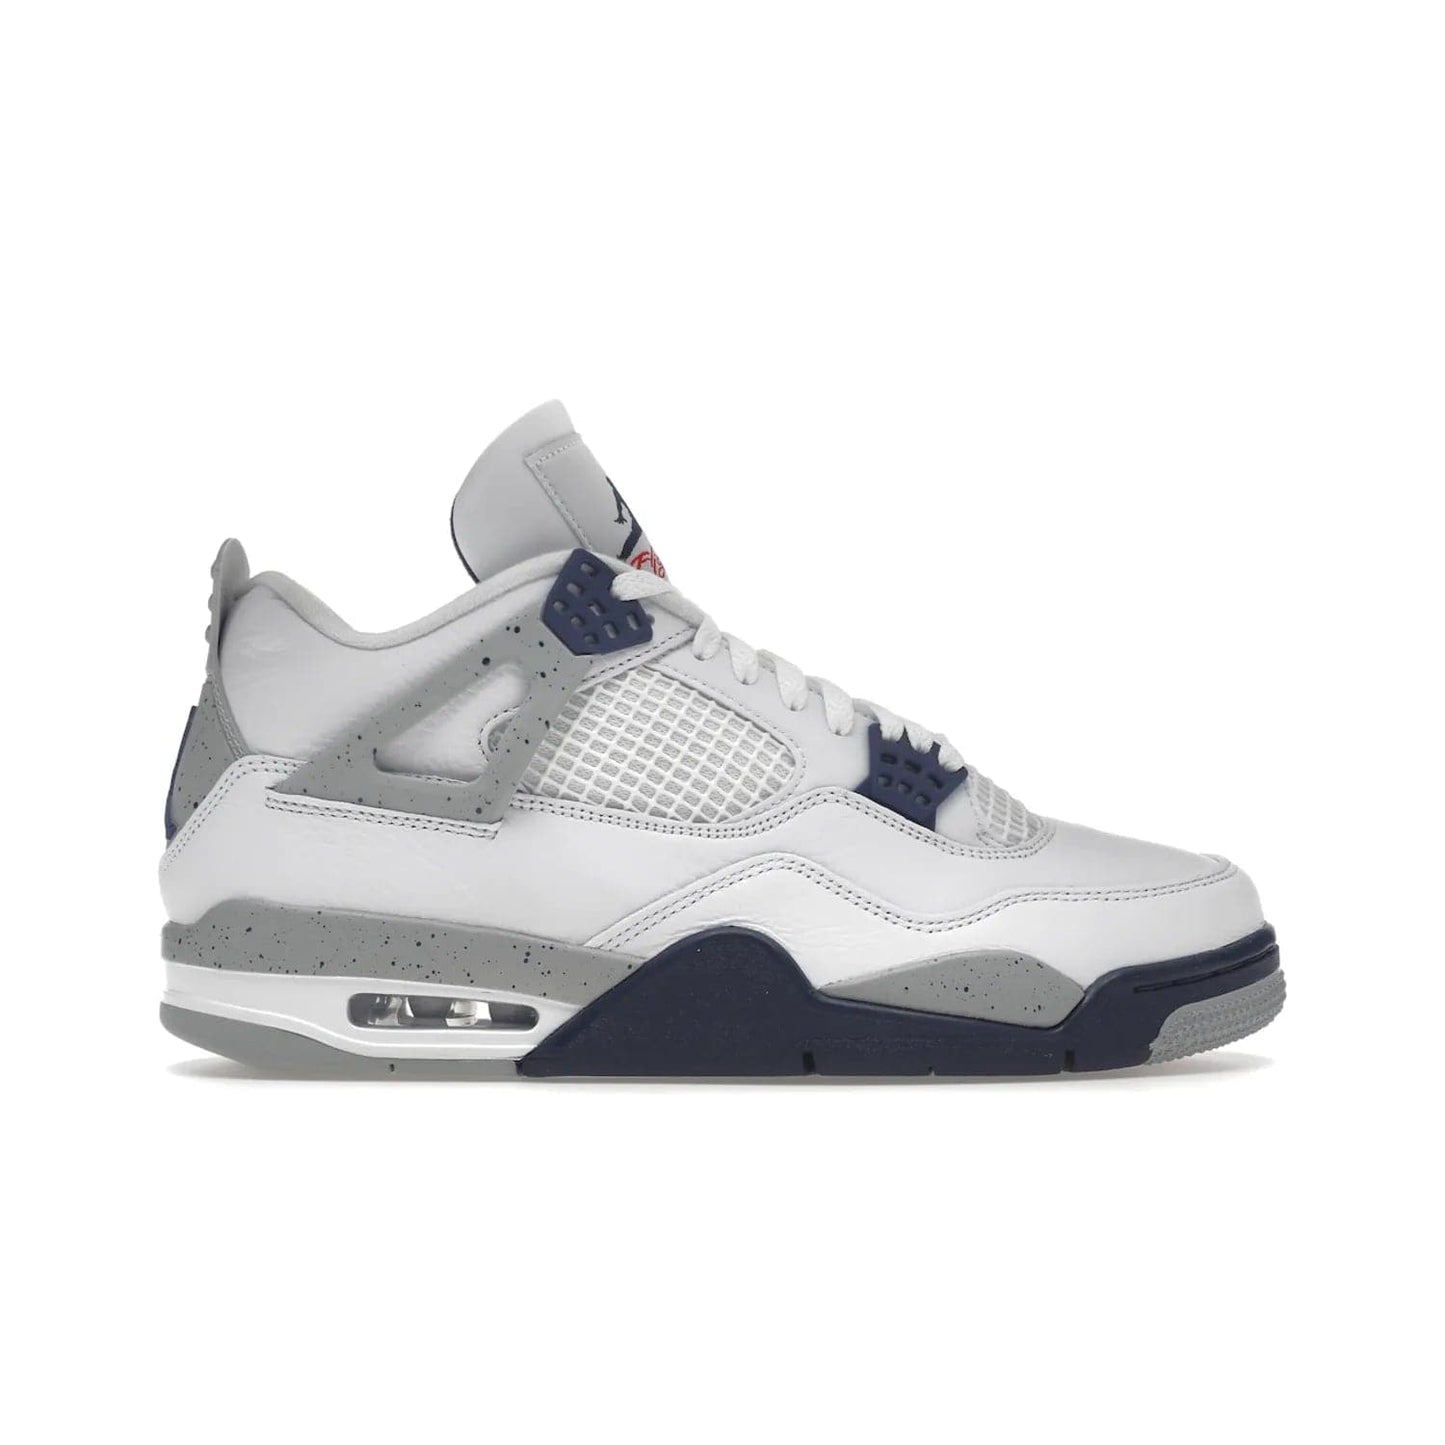 Jordan 4 Retro Midnight Navy - Image 1 - Only at www.BallersClubKickz.com - Shop the Air Jordan Retro 4 White Midnight Navy. Stand out with a classic white leather upper, black support wings, midnight navy eyelets, and Crimson Jumpman tongue tag. Unbeatable comfort with two-tone polyurethane midsole with encapsulated Air technology. Get yours before October 29th, 2022.